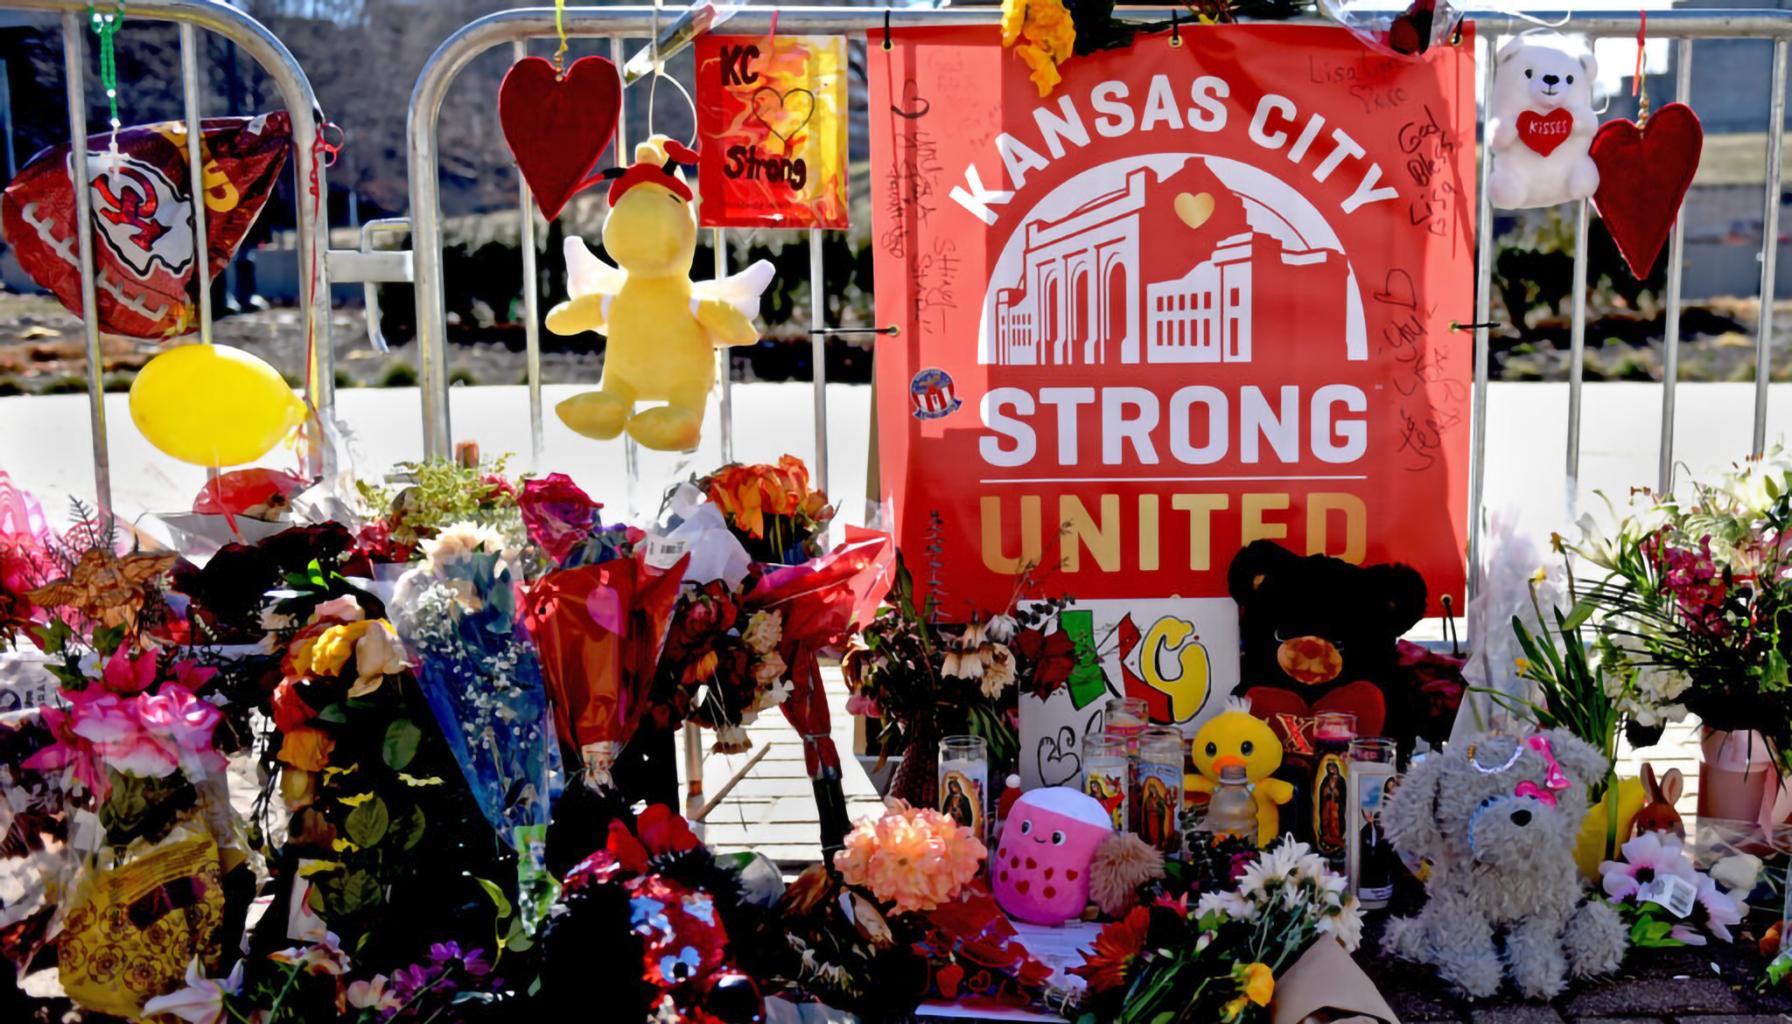 Memorial at site of Kansas City (KC) shooting (Photo by Anna Spoerre - Missouri Independent).